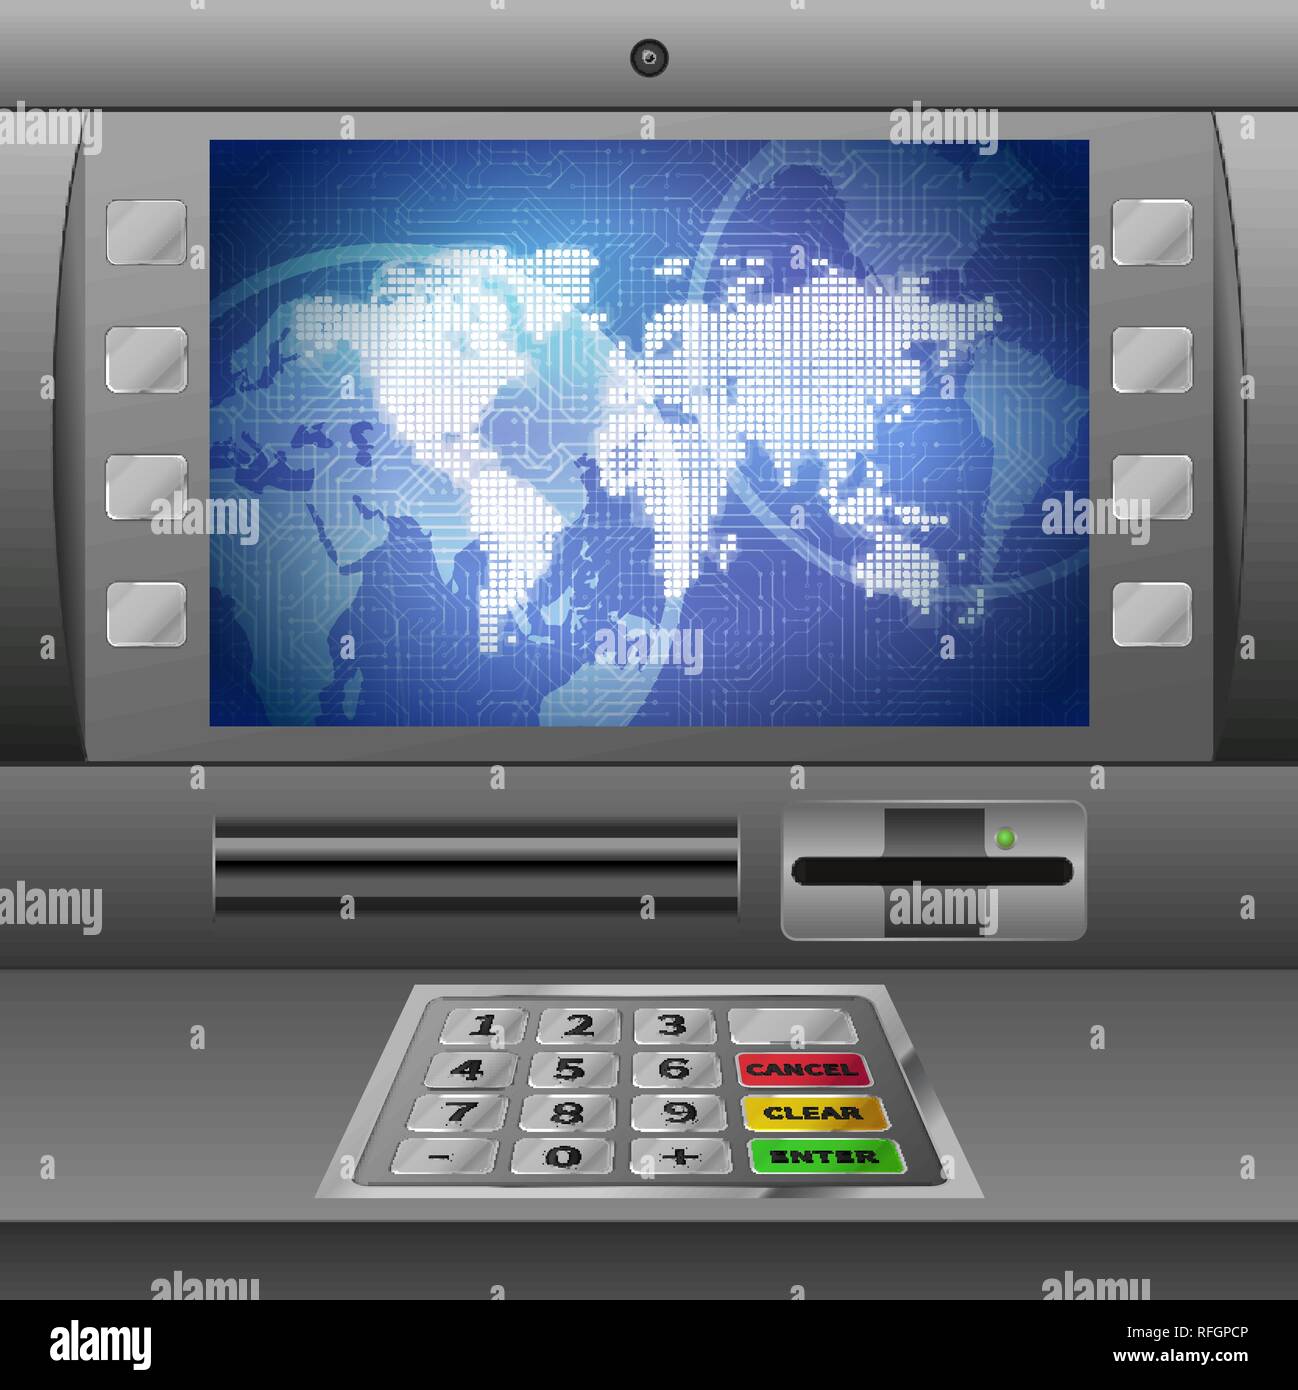 Download Realistic Atm Machine With Glossy Display And Keypad Stock Vector Image Art Alamy